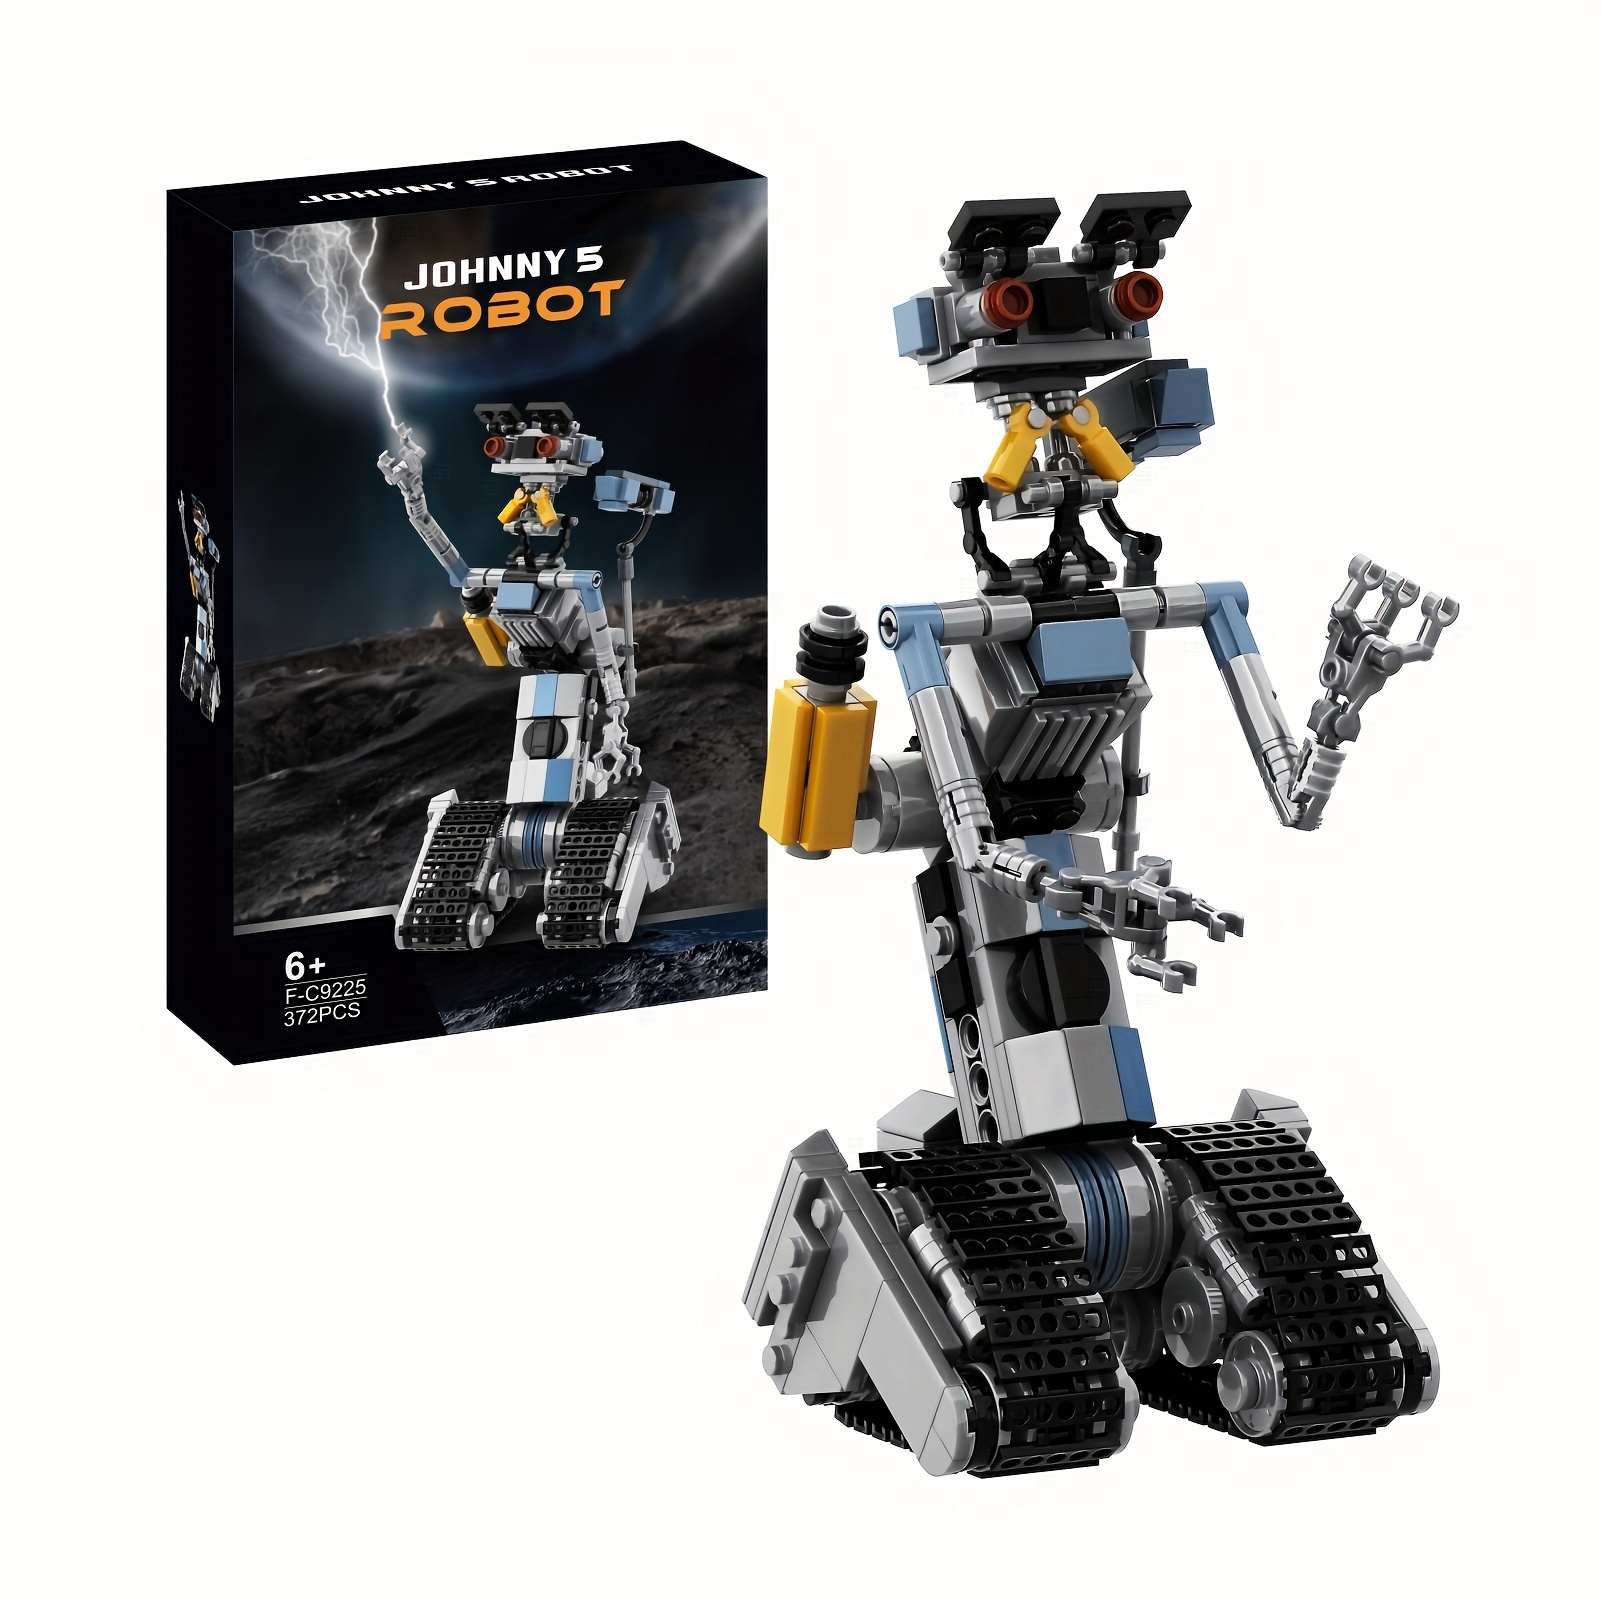 

369 Pieces Robot Model Building Block Toy Set Short Circuit Brick Collection With Gift Box, Creative Building Block Gifts